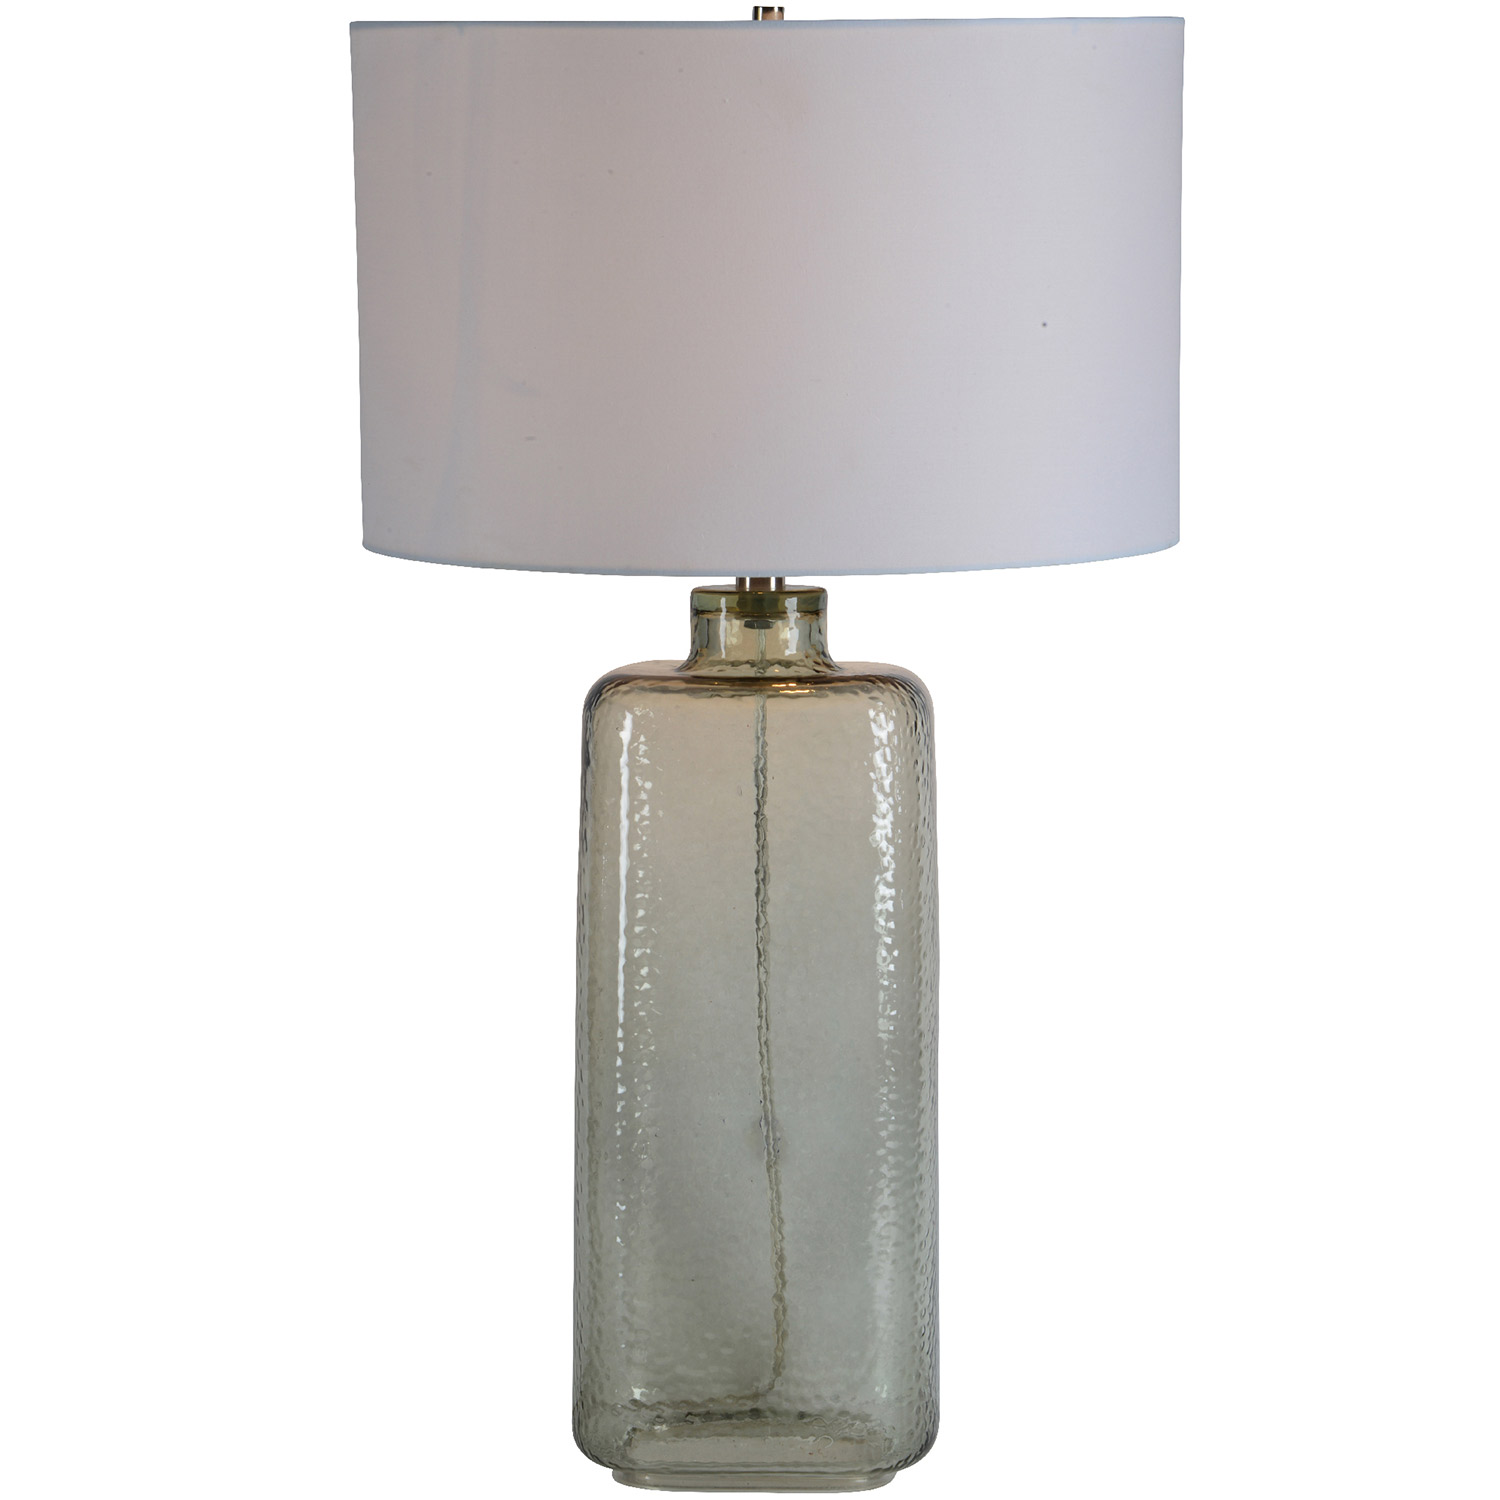 Ren-Wil Southall Table Lamp - Clear